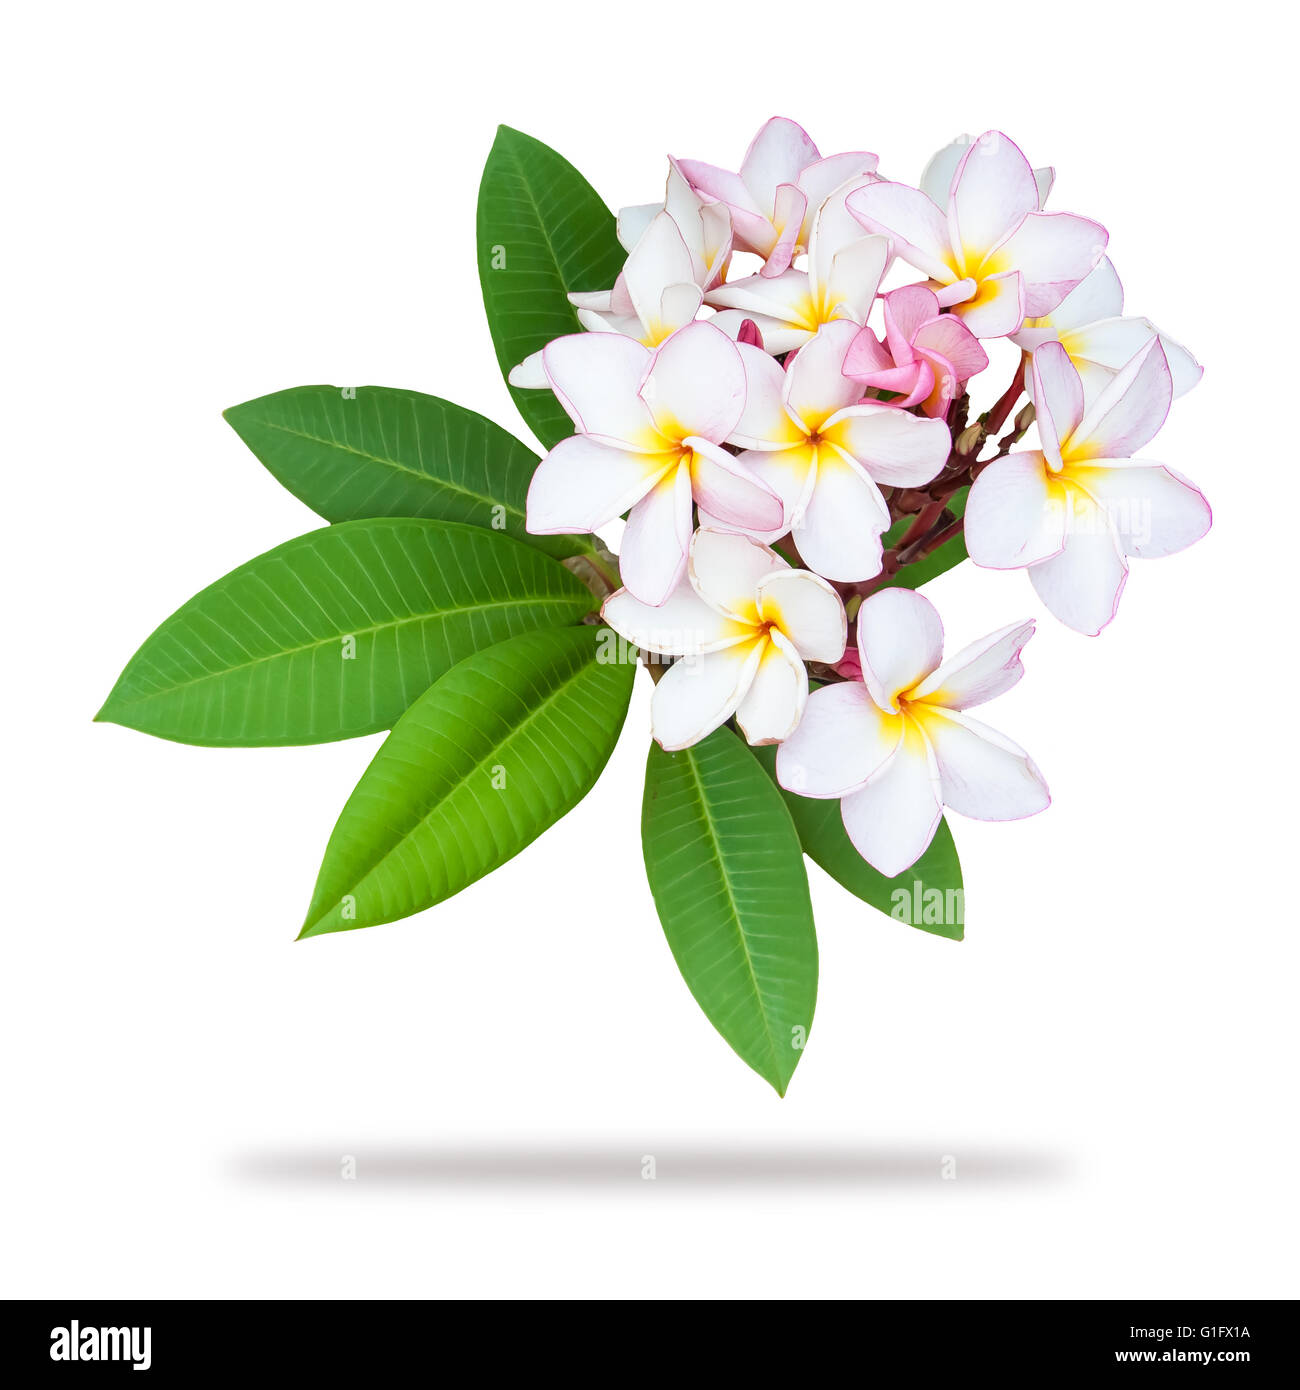 Frangipani plumeria branch isolated on white background, clipping path included Stock Photo